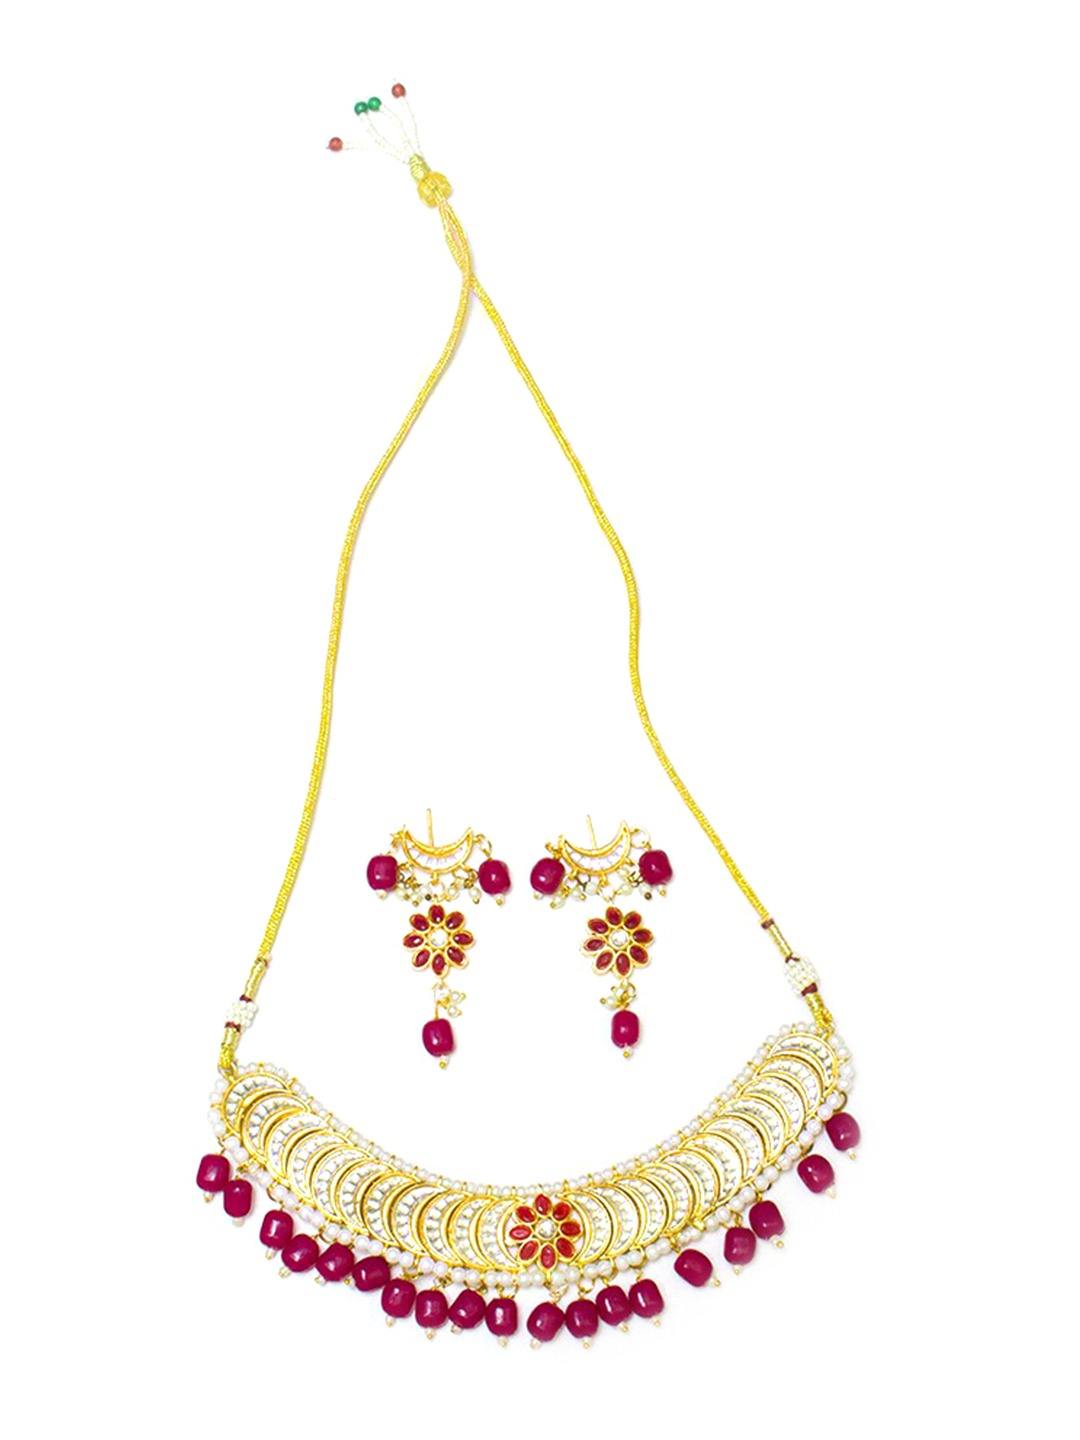 Women's Pink & White Gold-Plated Stone-Studded & Beaded Jewellery Set - Morkanth